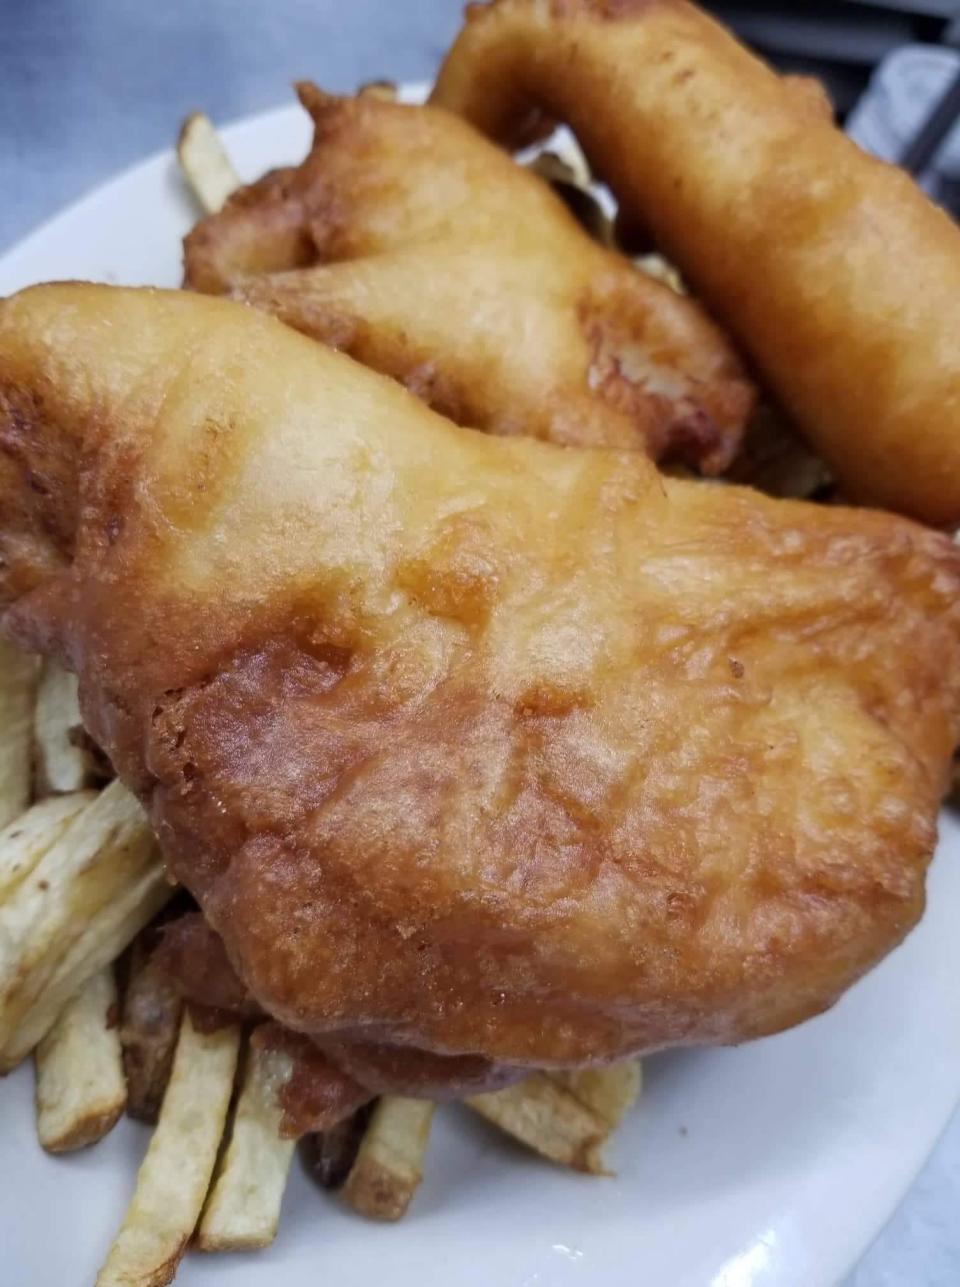 Fish and chips at Knuckle Heads Bar & Grill.